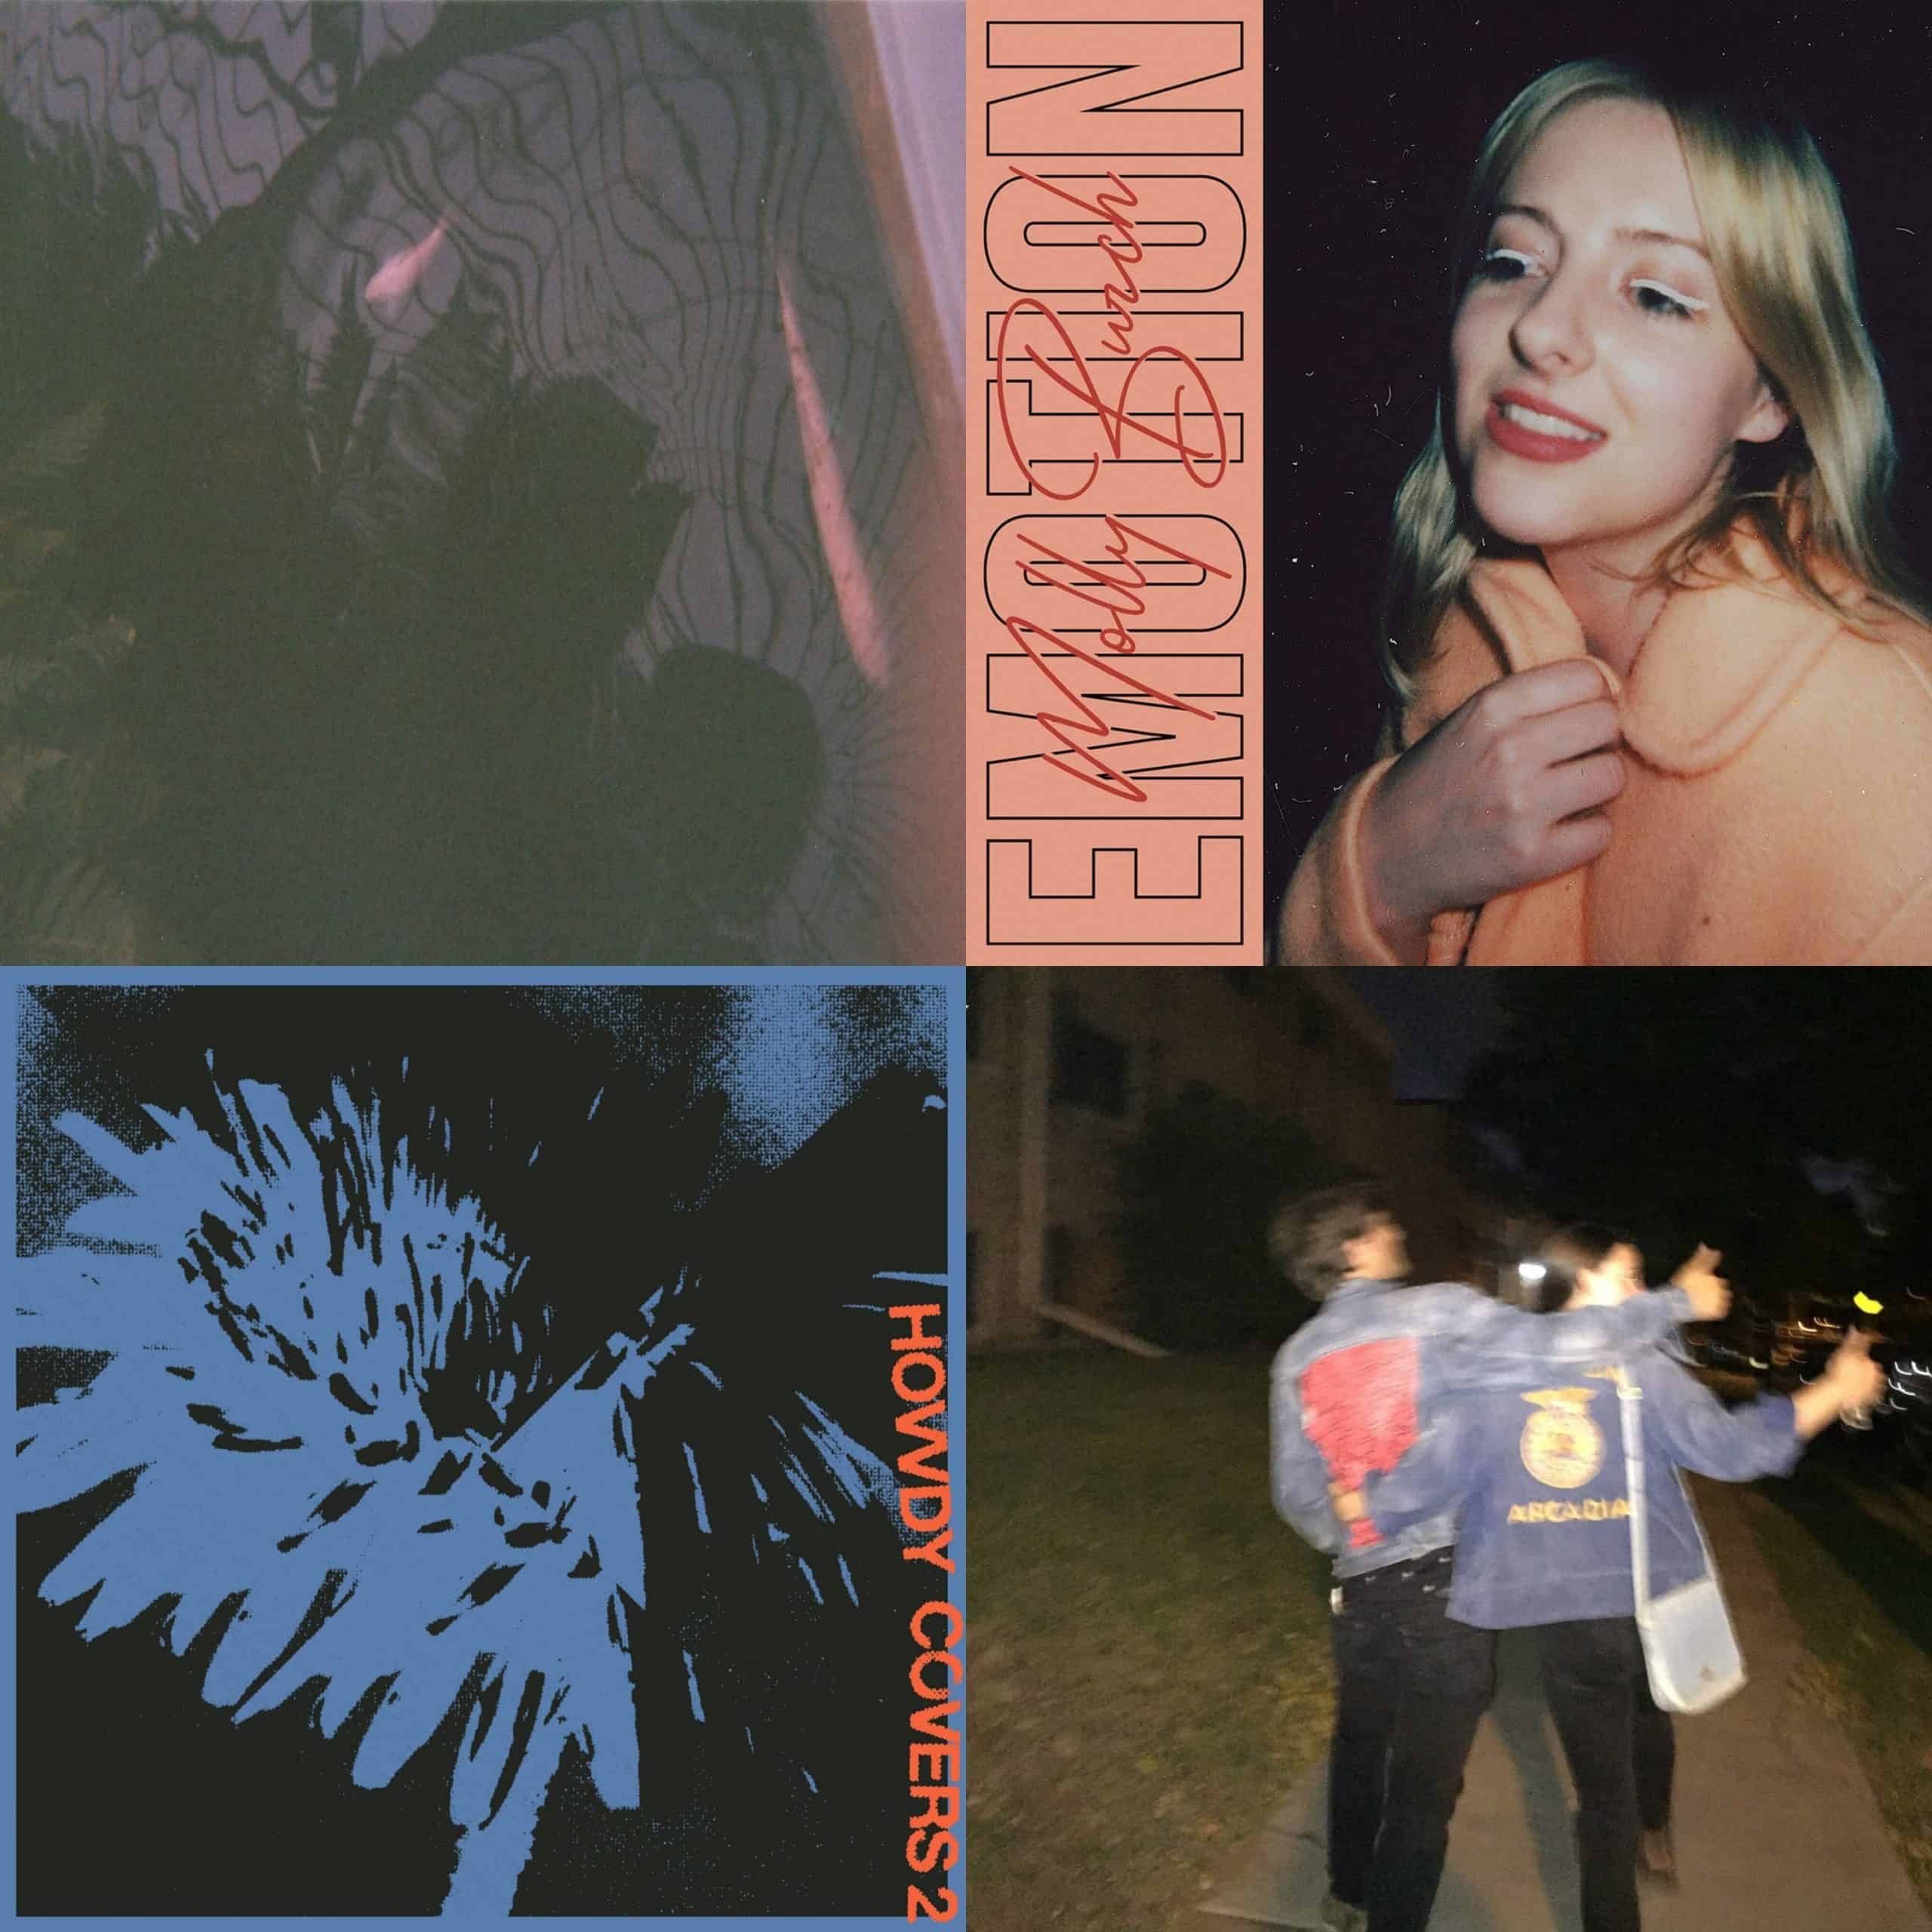 New Music: Cathedral Bells, Molly Burch, Hovvdy, Aero Flynn